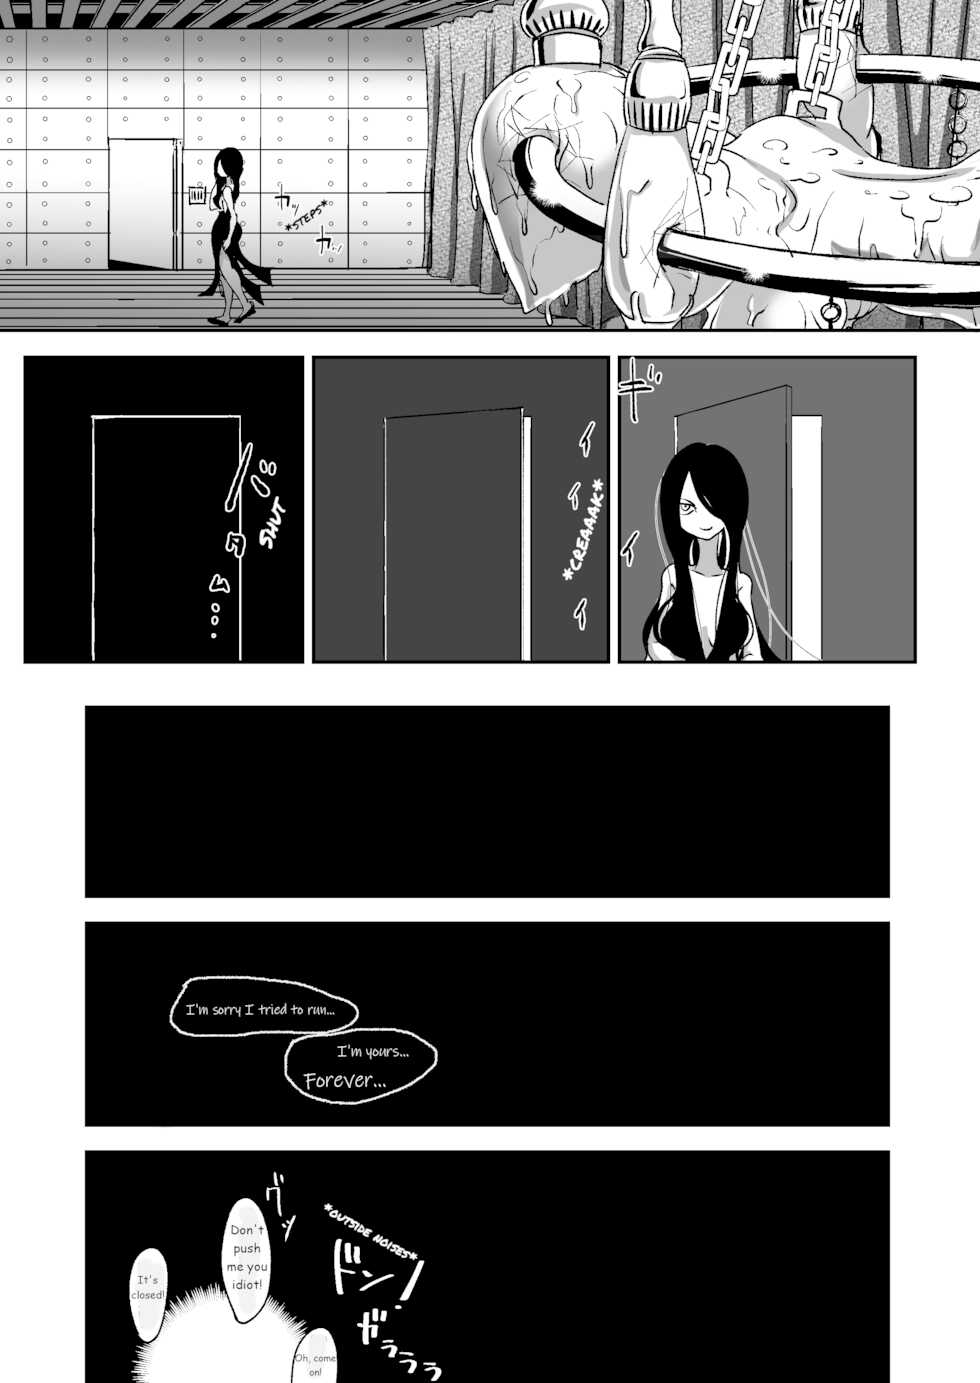 [Shimanami (Archipelago)] Dead End House Anthology - (The Chandelier/1.5/The Exorcist/Spinoff Expansions) [Ongoing] - Page 34